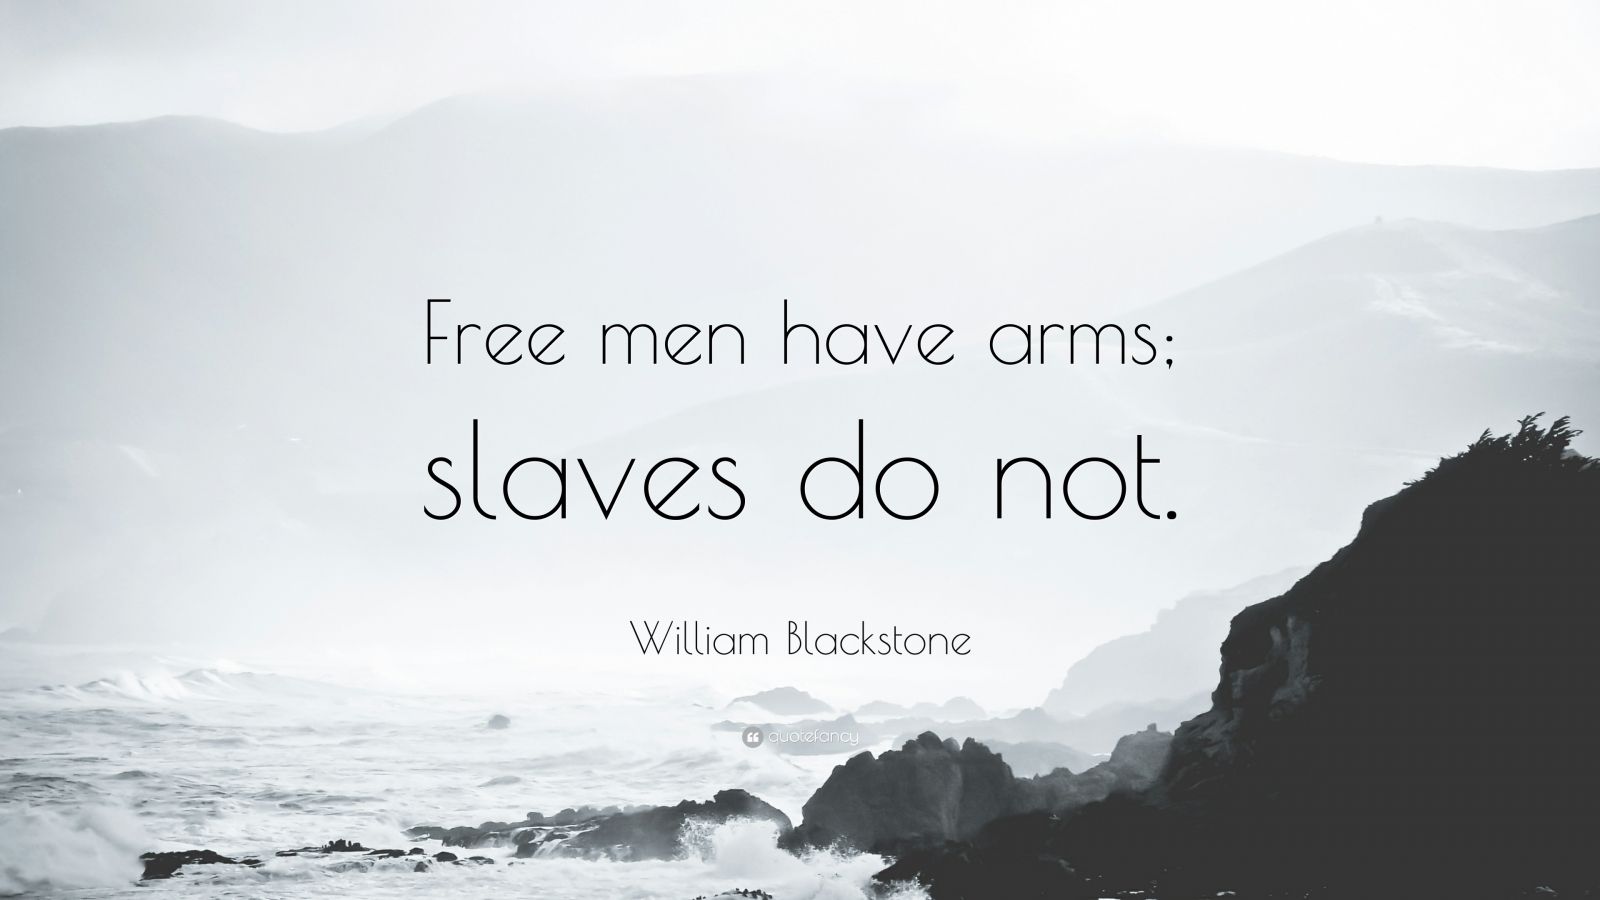 William Blackstone Quote: “Free men have arms; slaves do not.” (10